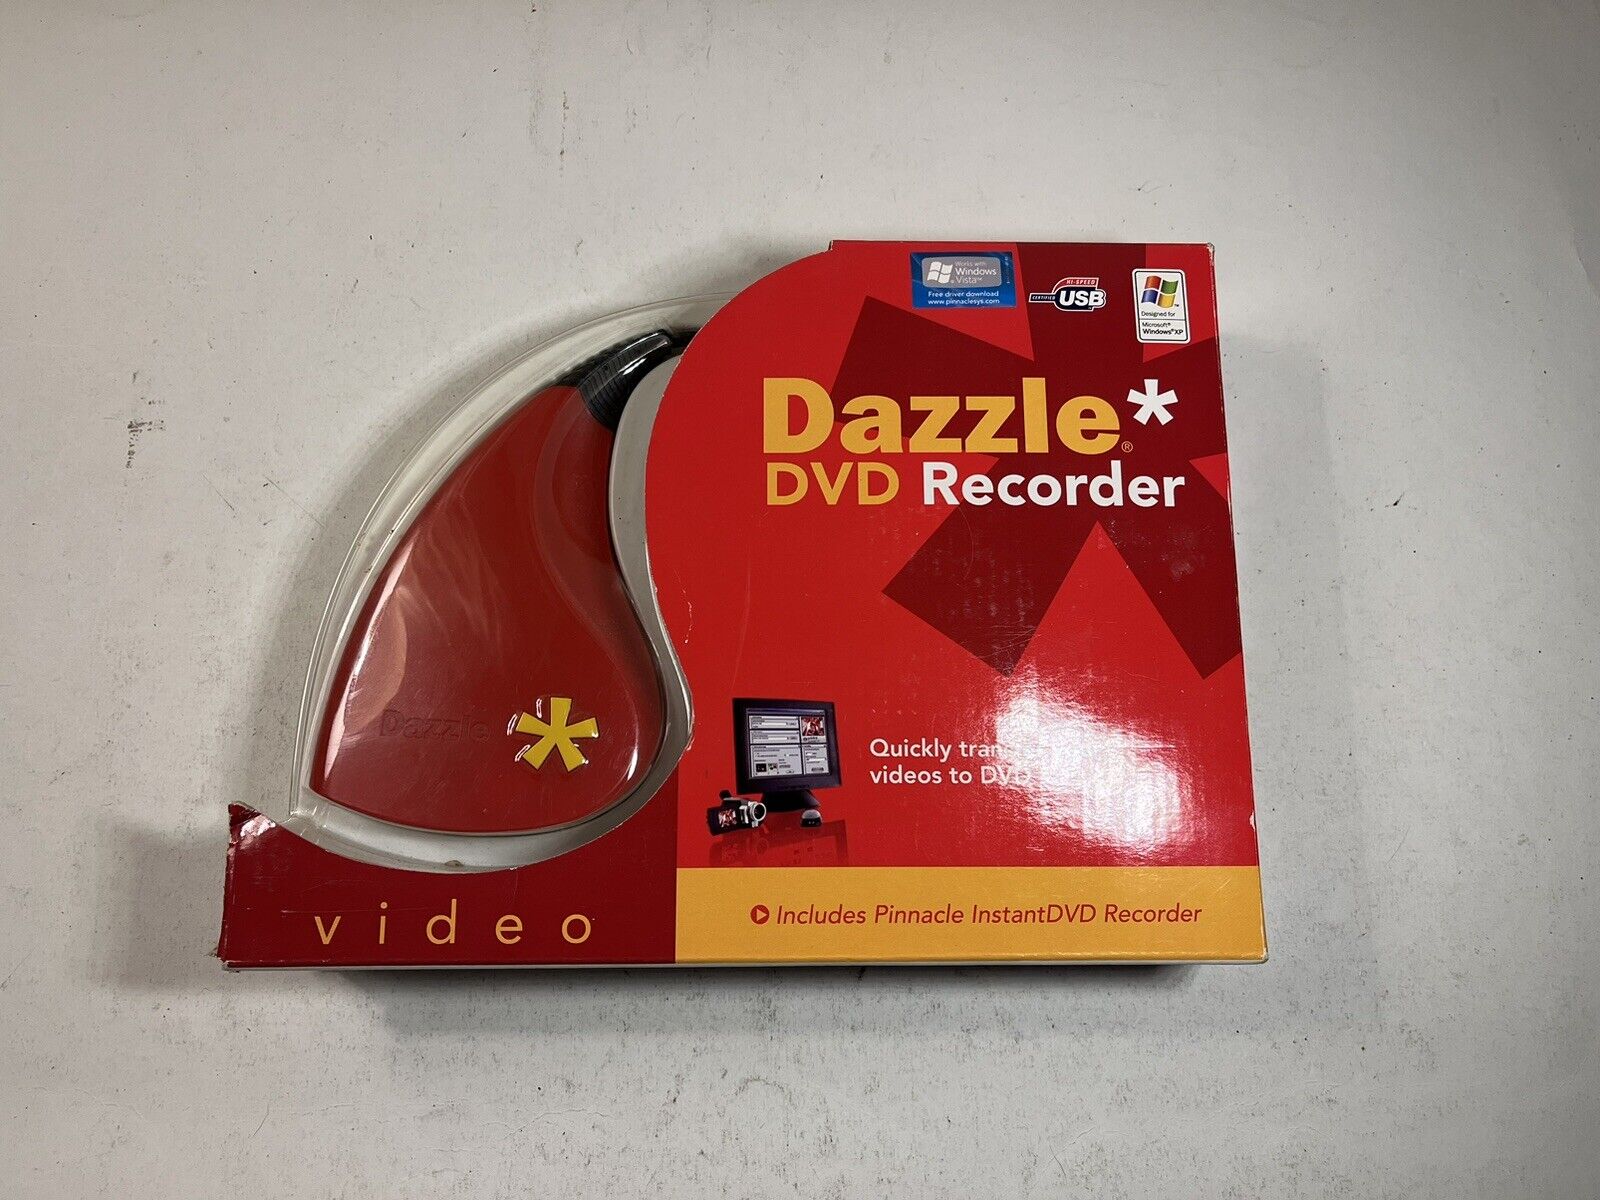 Pinnacle Dazzle DVD Recorder Video Capture PC USB Transfer Your Videos To DVD 